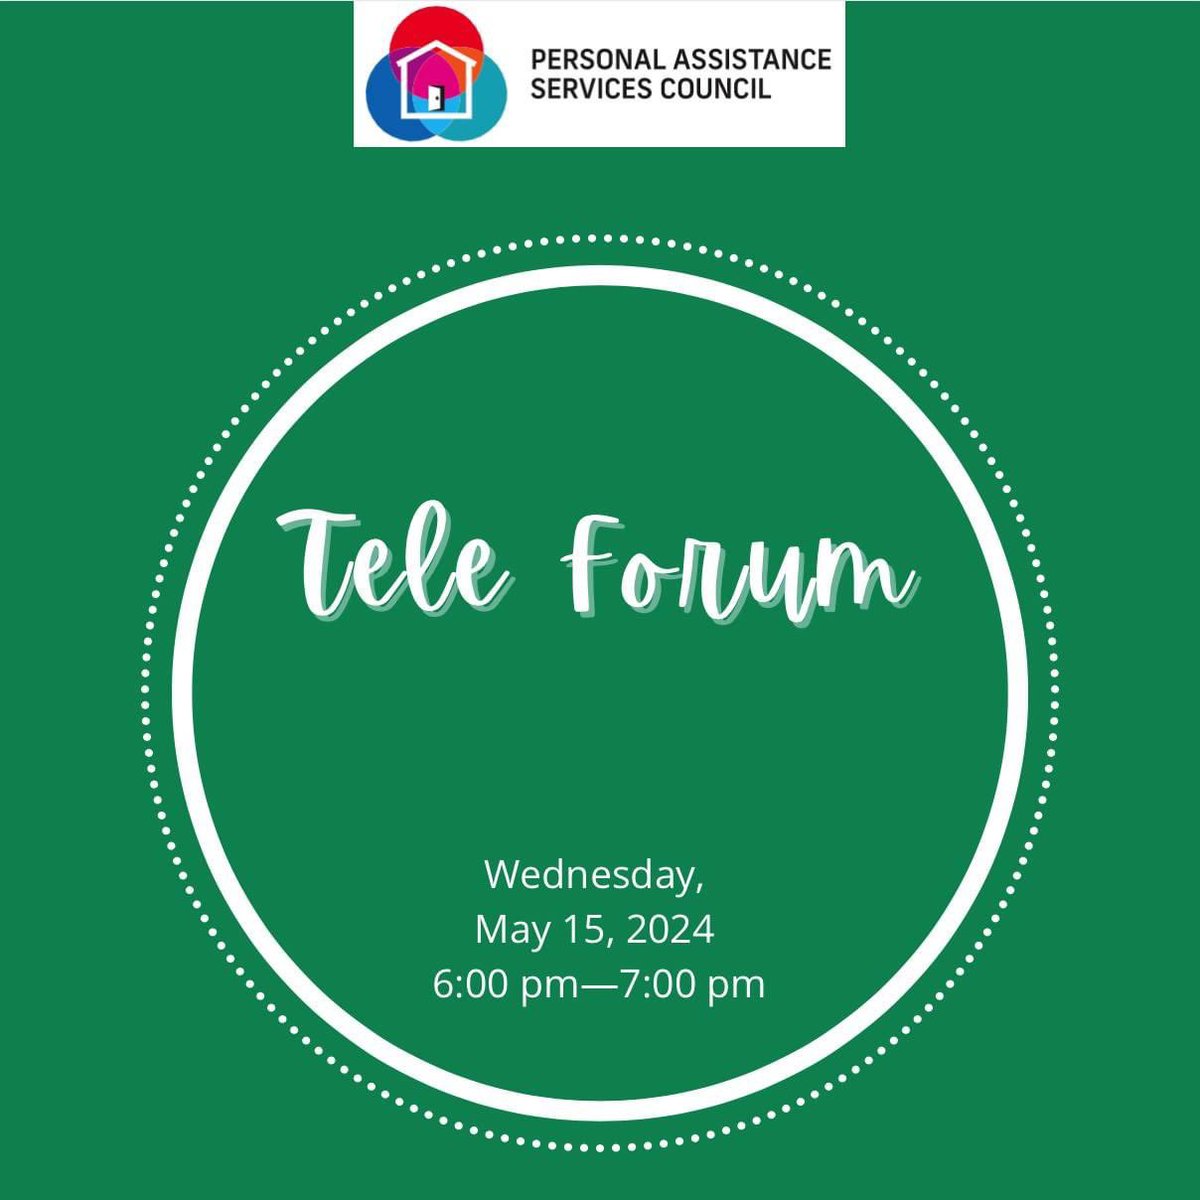 Join our Tele Forum today! Register here-> bit.ly/3QgHnbx. Join us online, and watch the Tele Forum here -> bit.ly/3KBnGrt. Tele Forum dial-in number: 877-229-8493 Tele Forum ID code: 111563 #pasc #pascla #ihss #providers #caregivers #losangeles #lacounty